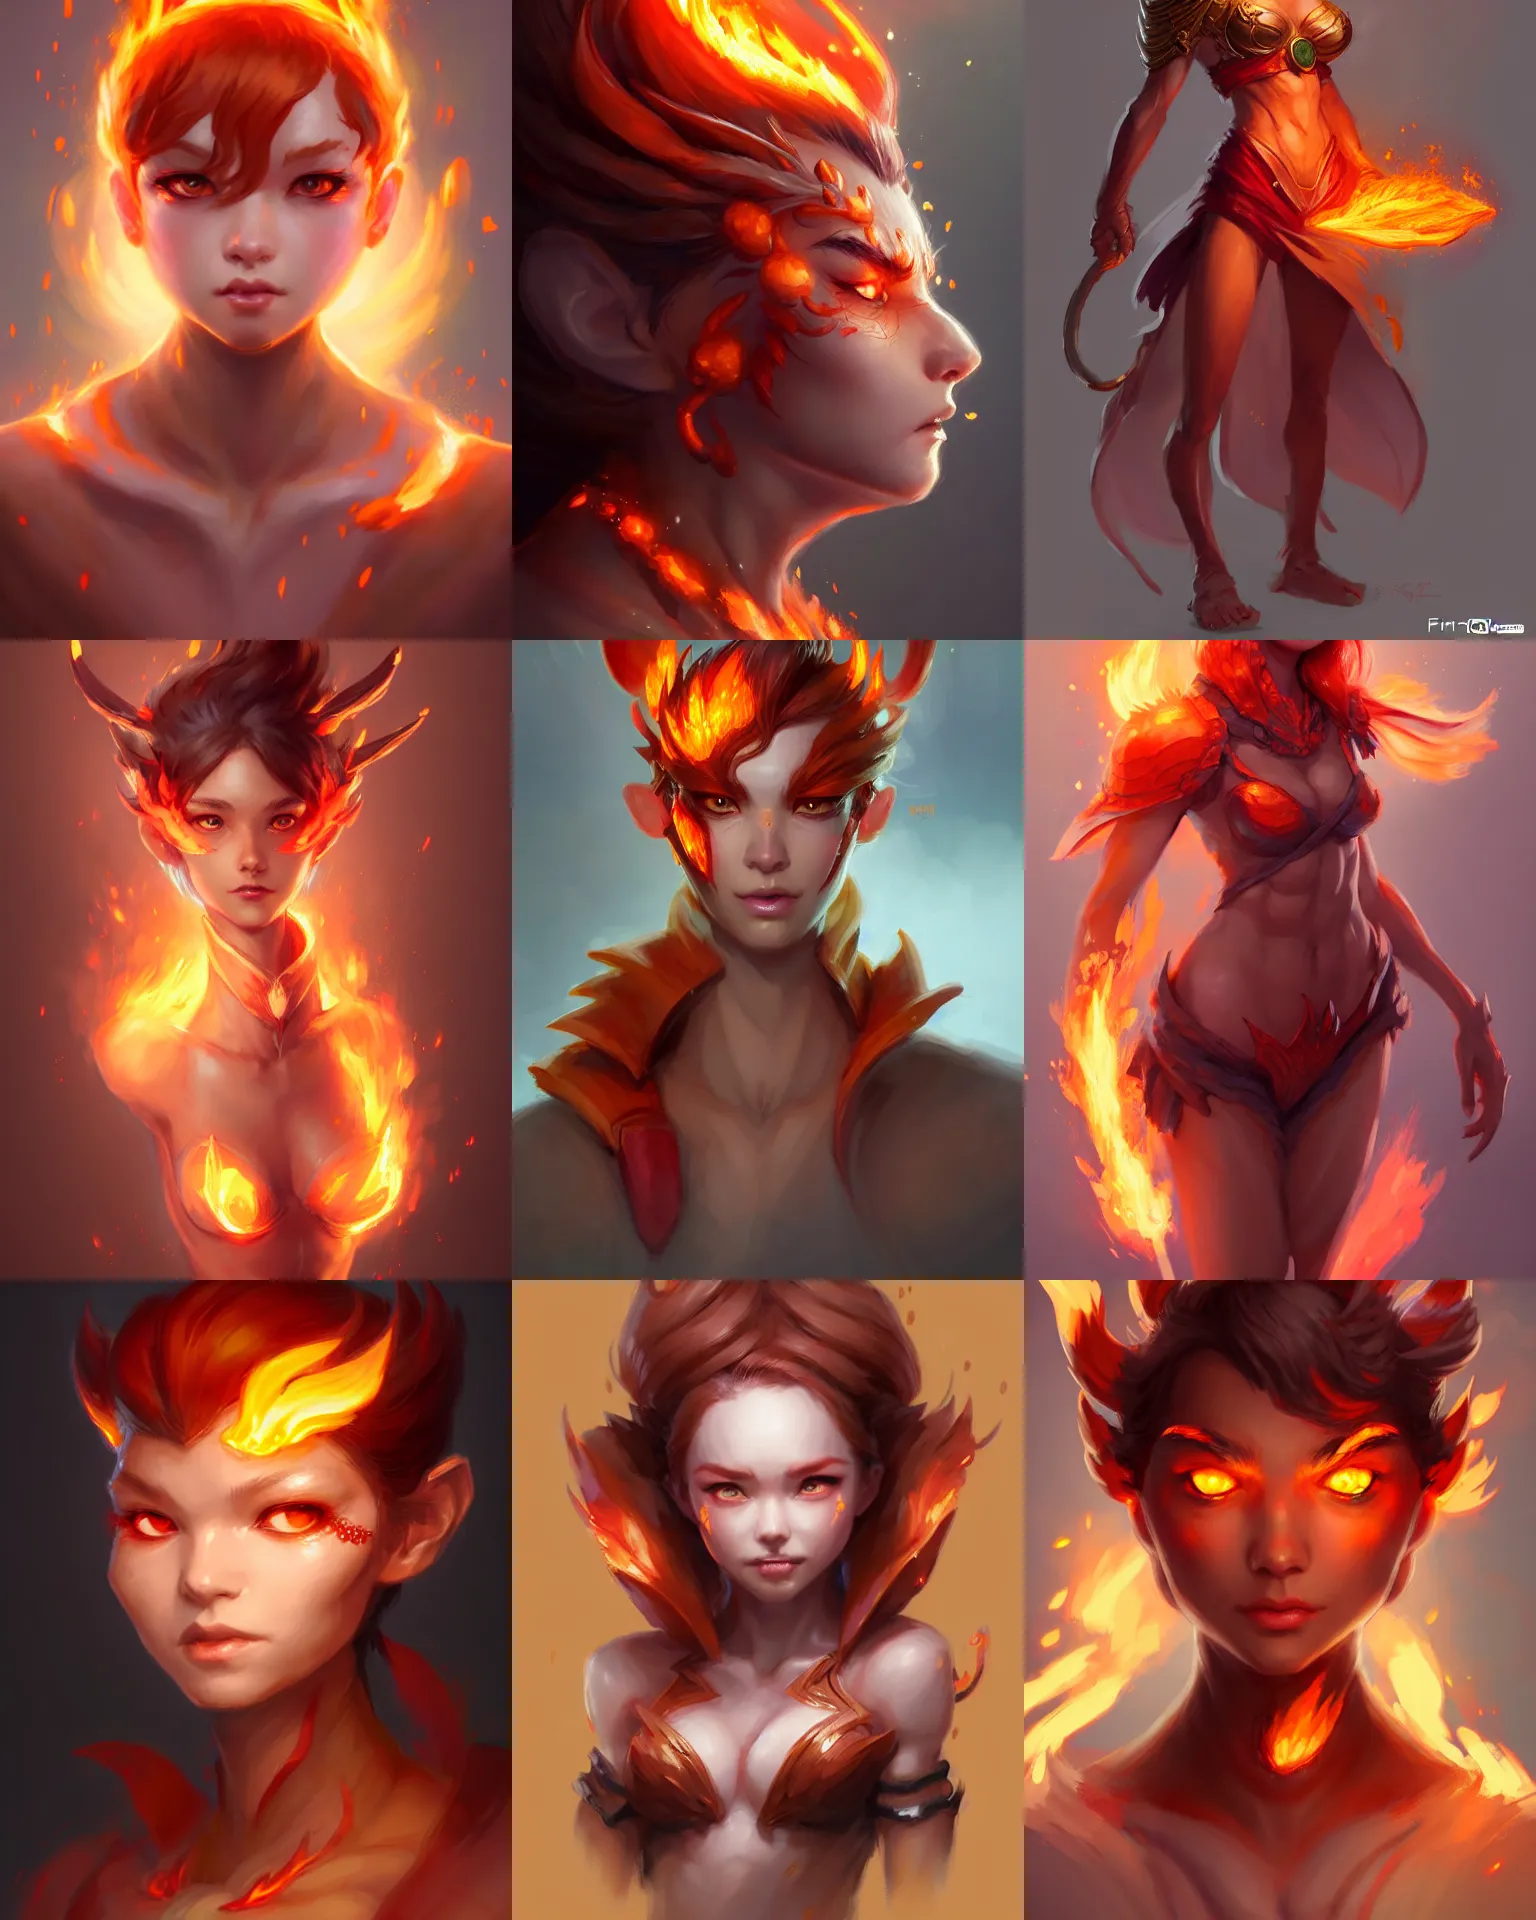 Premium AI Image  female character having water and fire power character  design concept in anime style